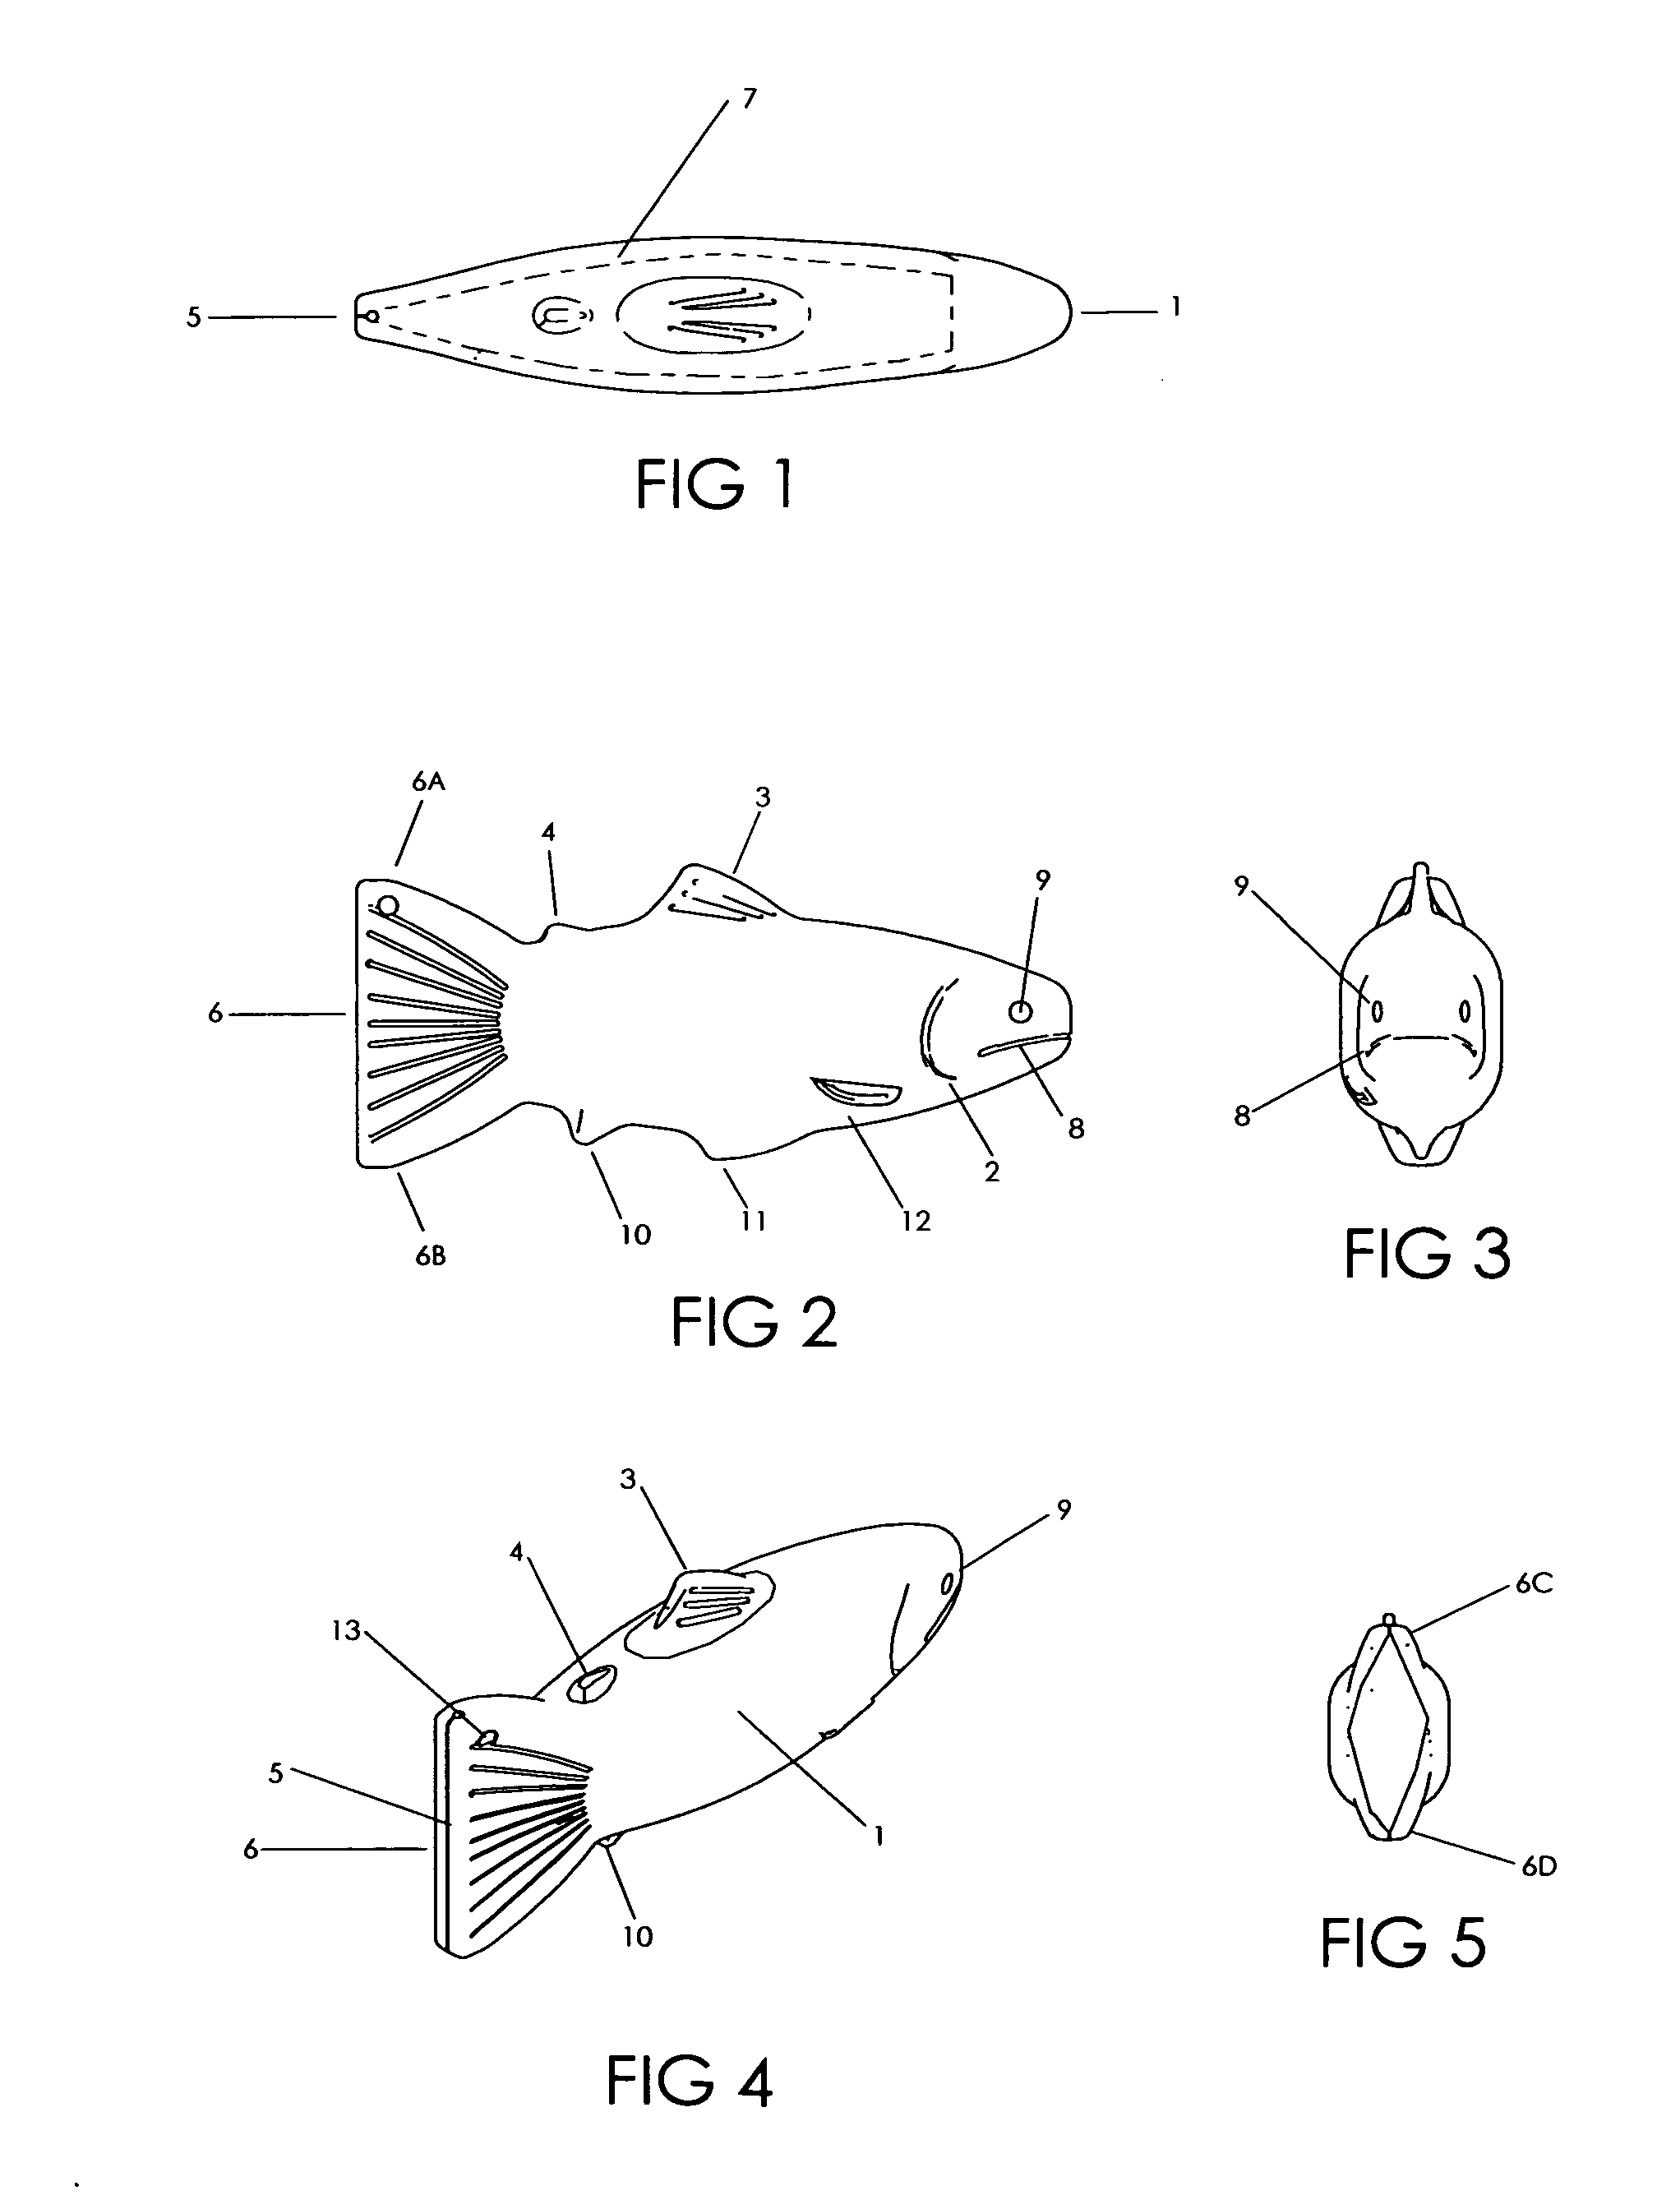 Flexible fish shaped container for disposal of fisher's litter